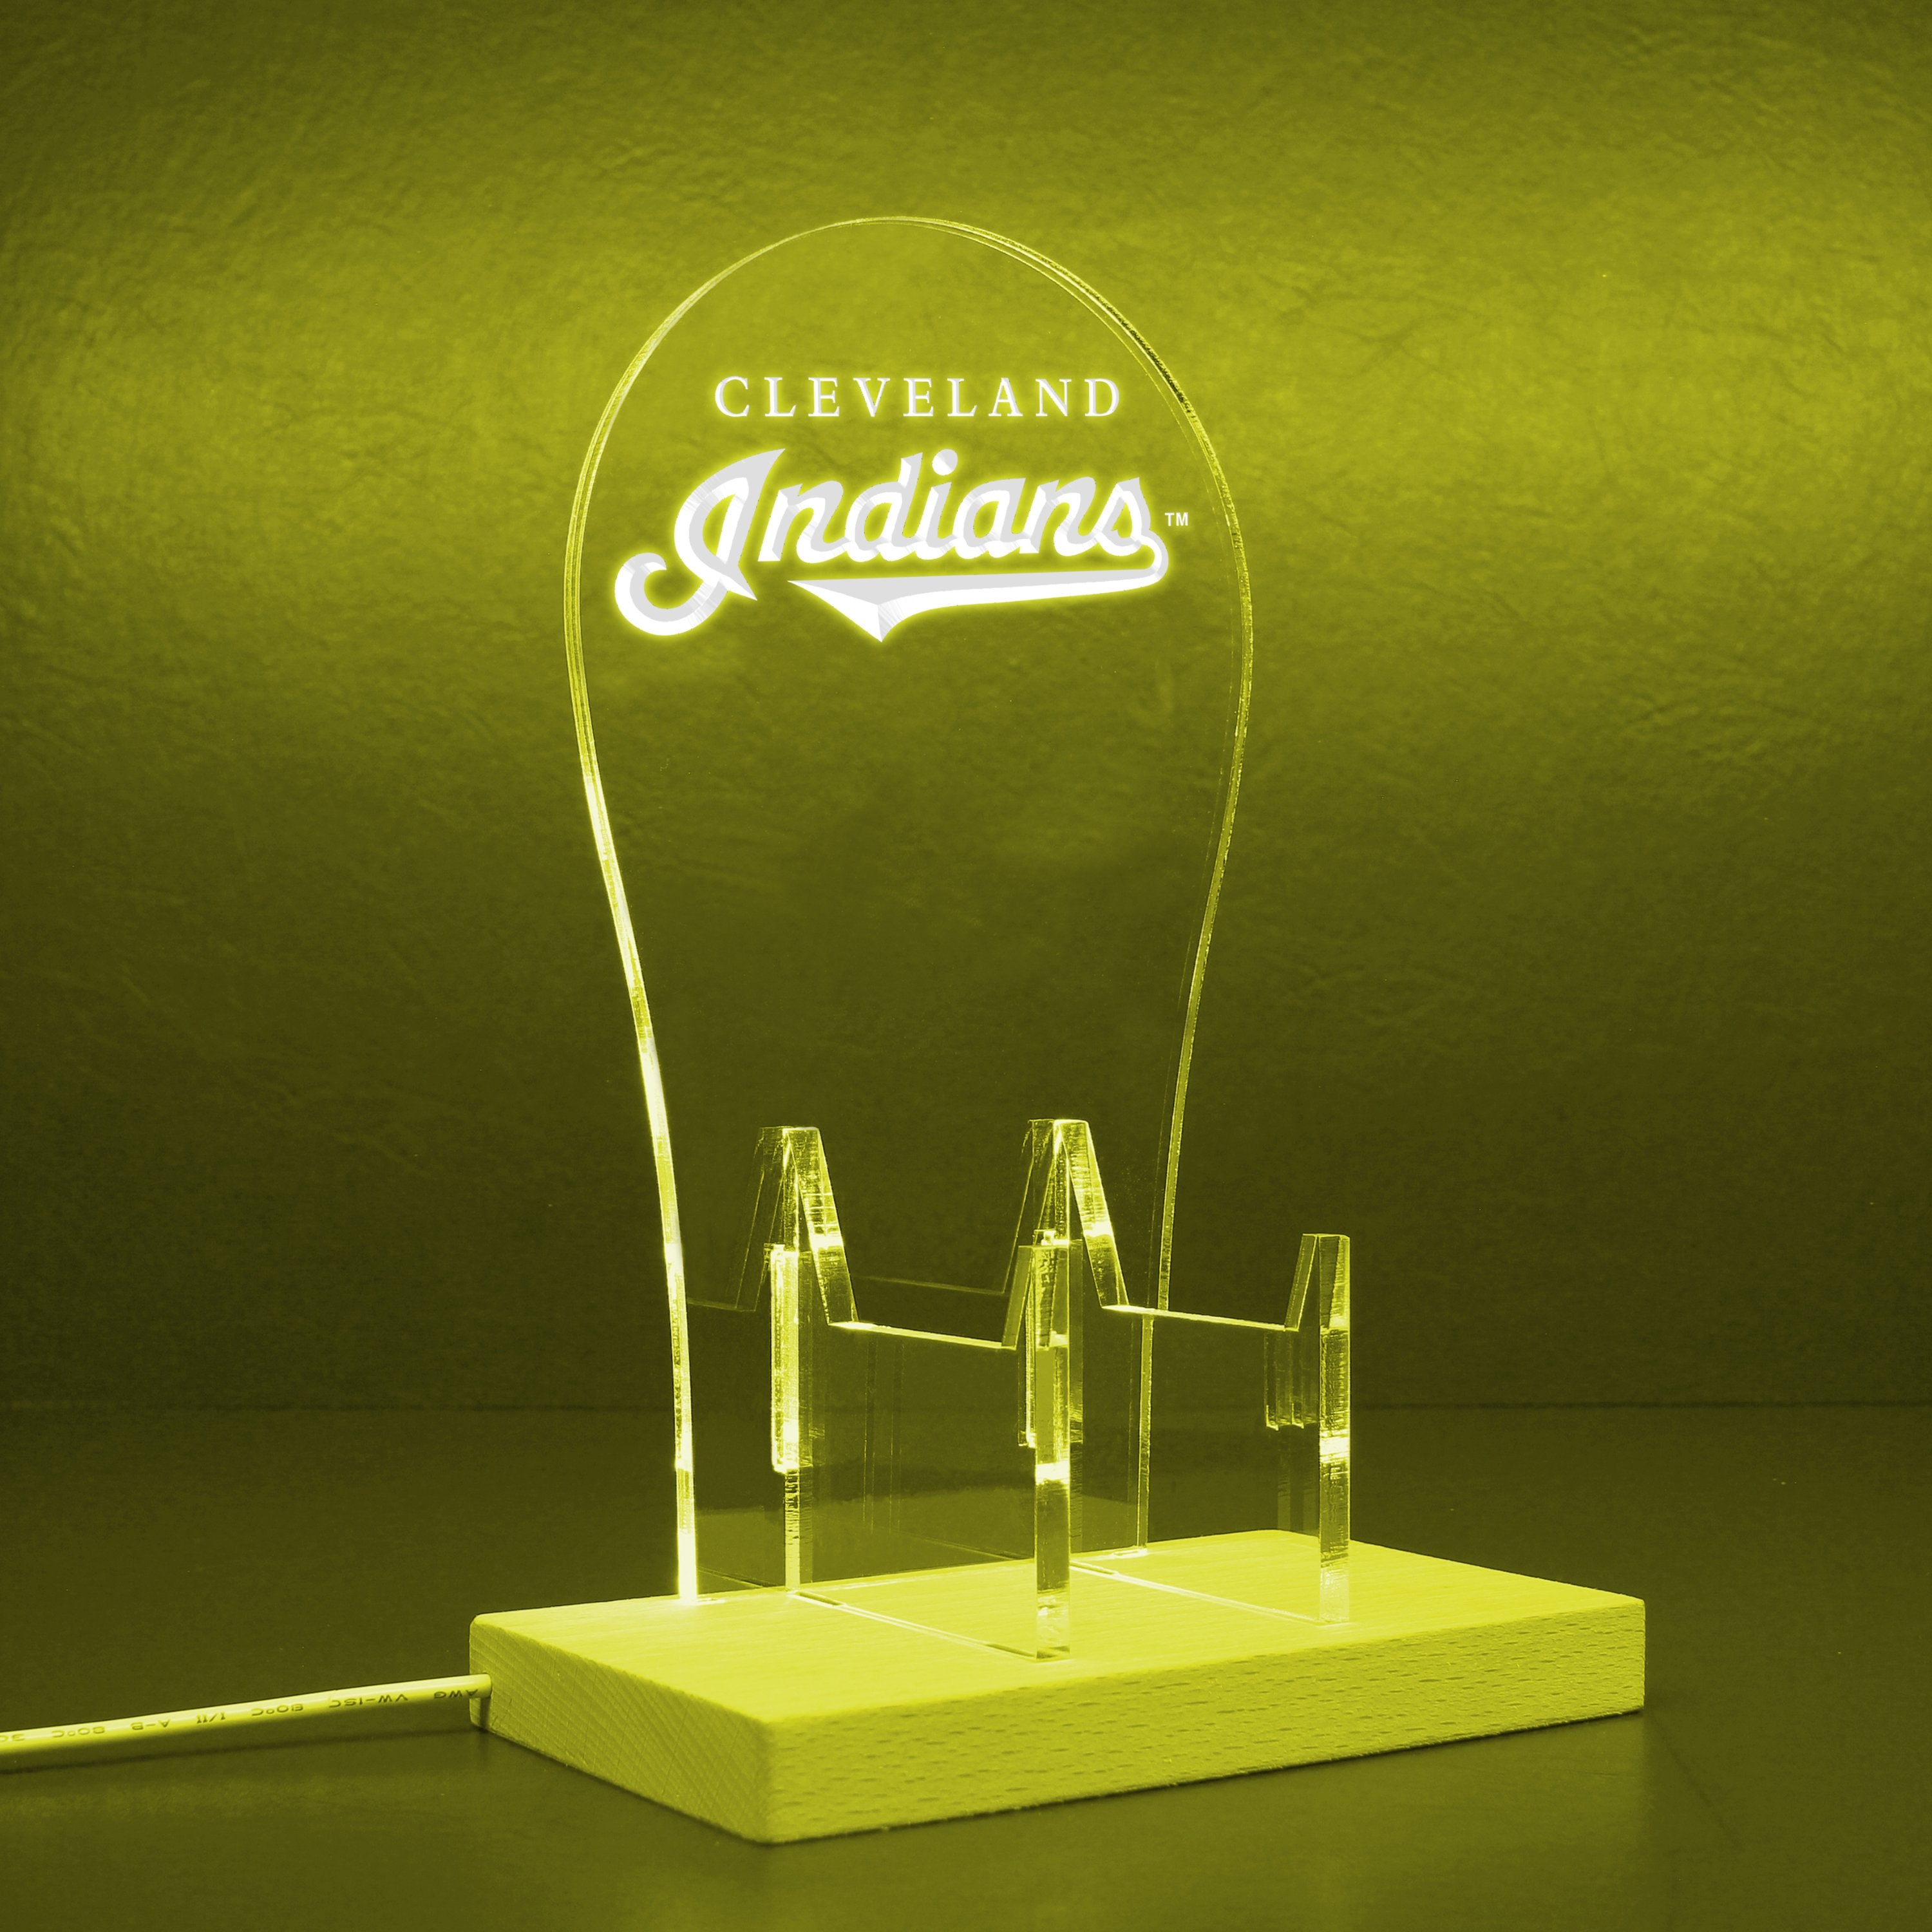 Cleveland Indians Wordmark Logos used in 1994 - 2011 RGB LED Gaming Headset Controller Stand